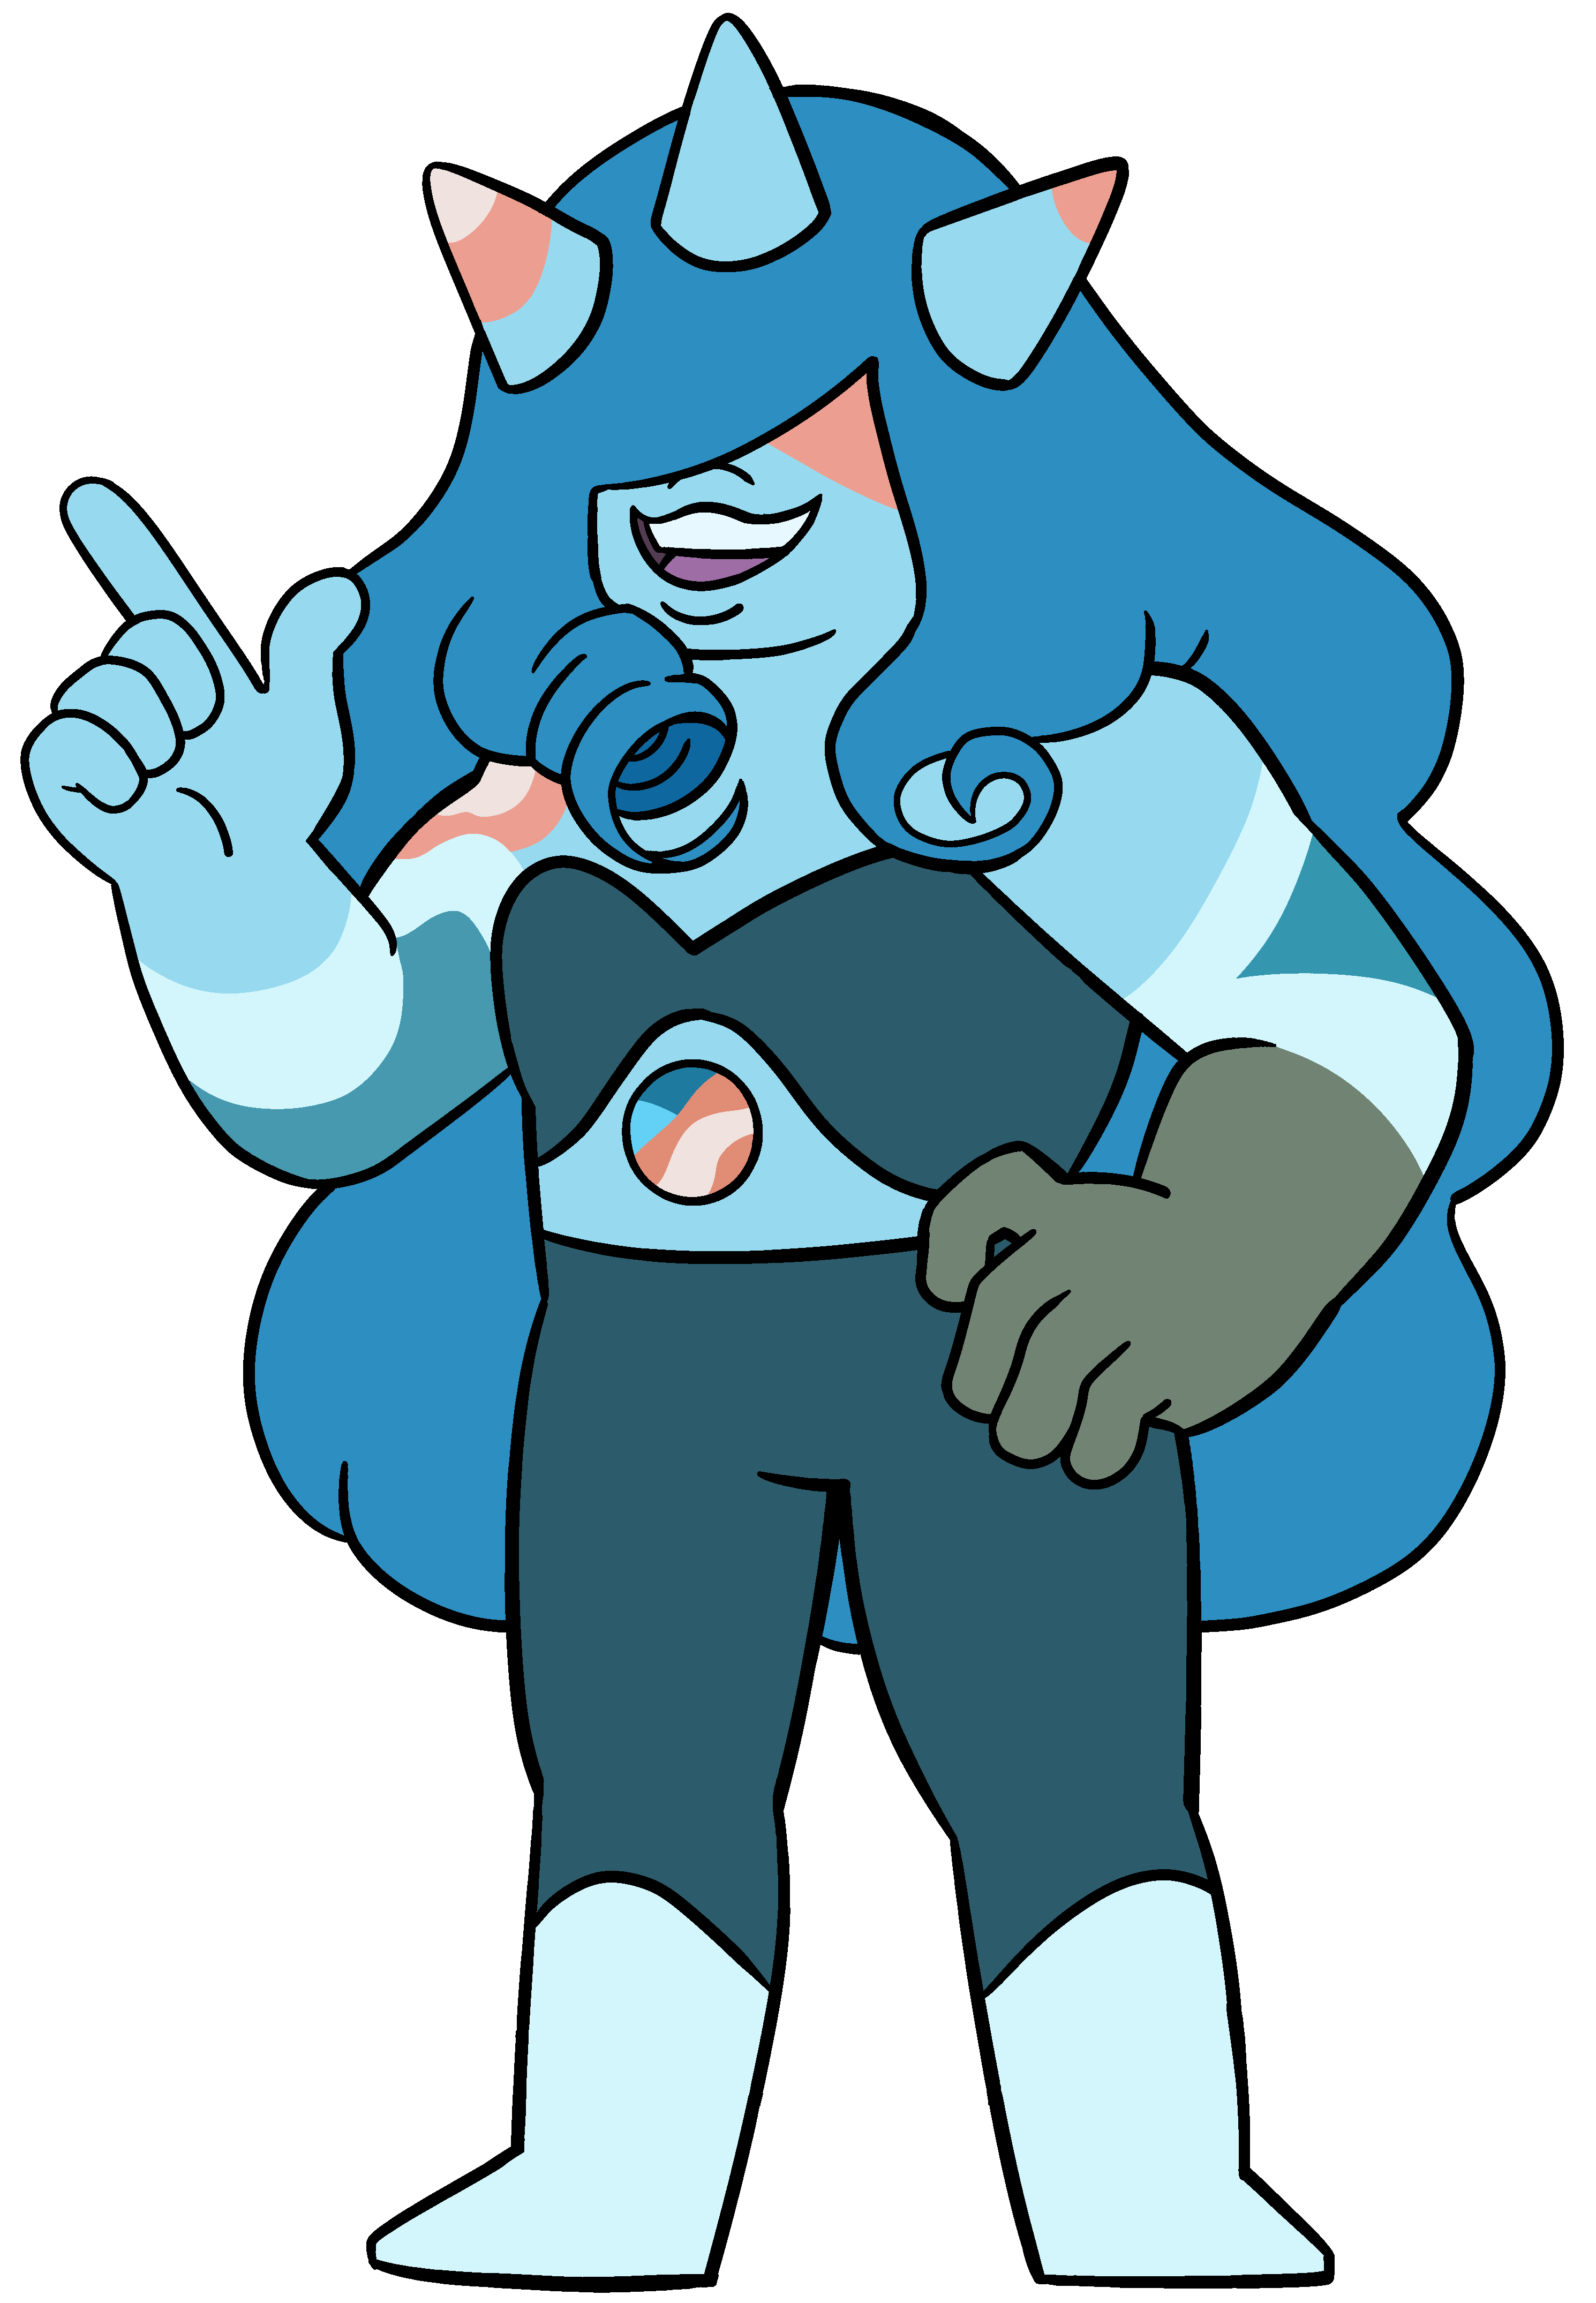 https://static.wikia.nocookie.net/steven-universe/images/4/44/Blue_Lace_Agate_%28Day_Palette%29_by_RylerGamerDBS.png/revision/latest?cb=20201129201315